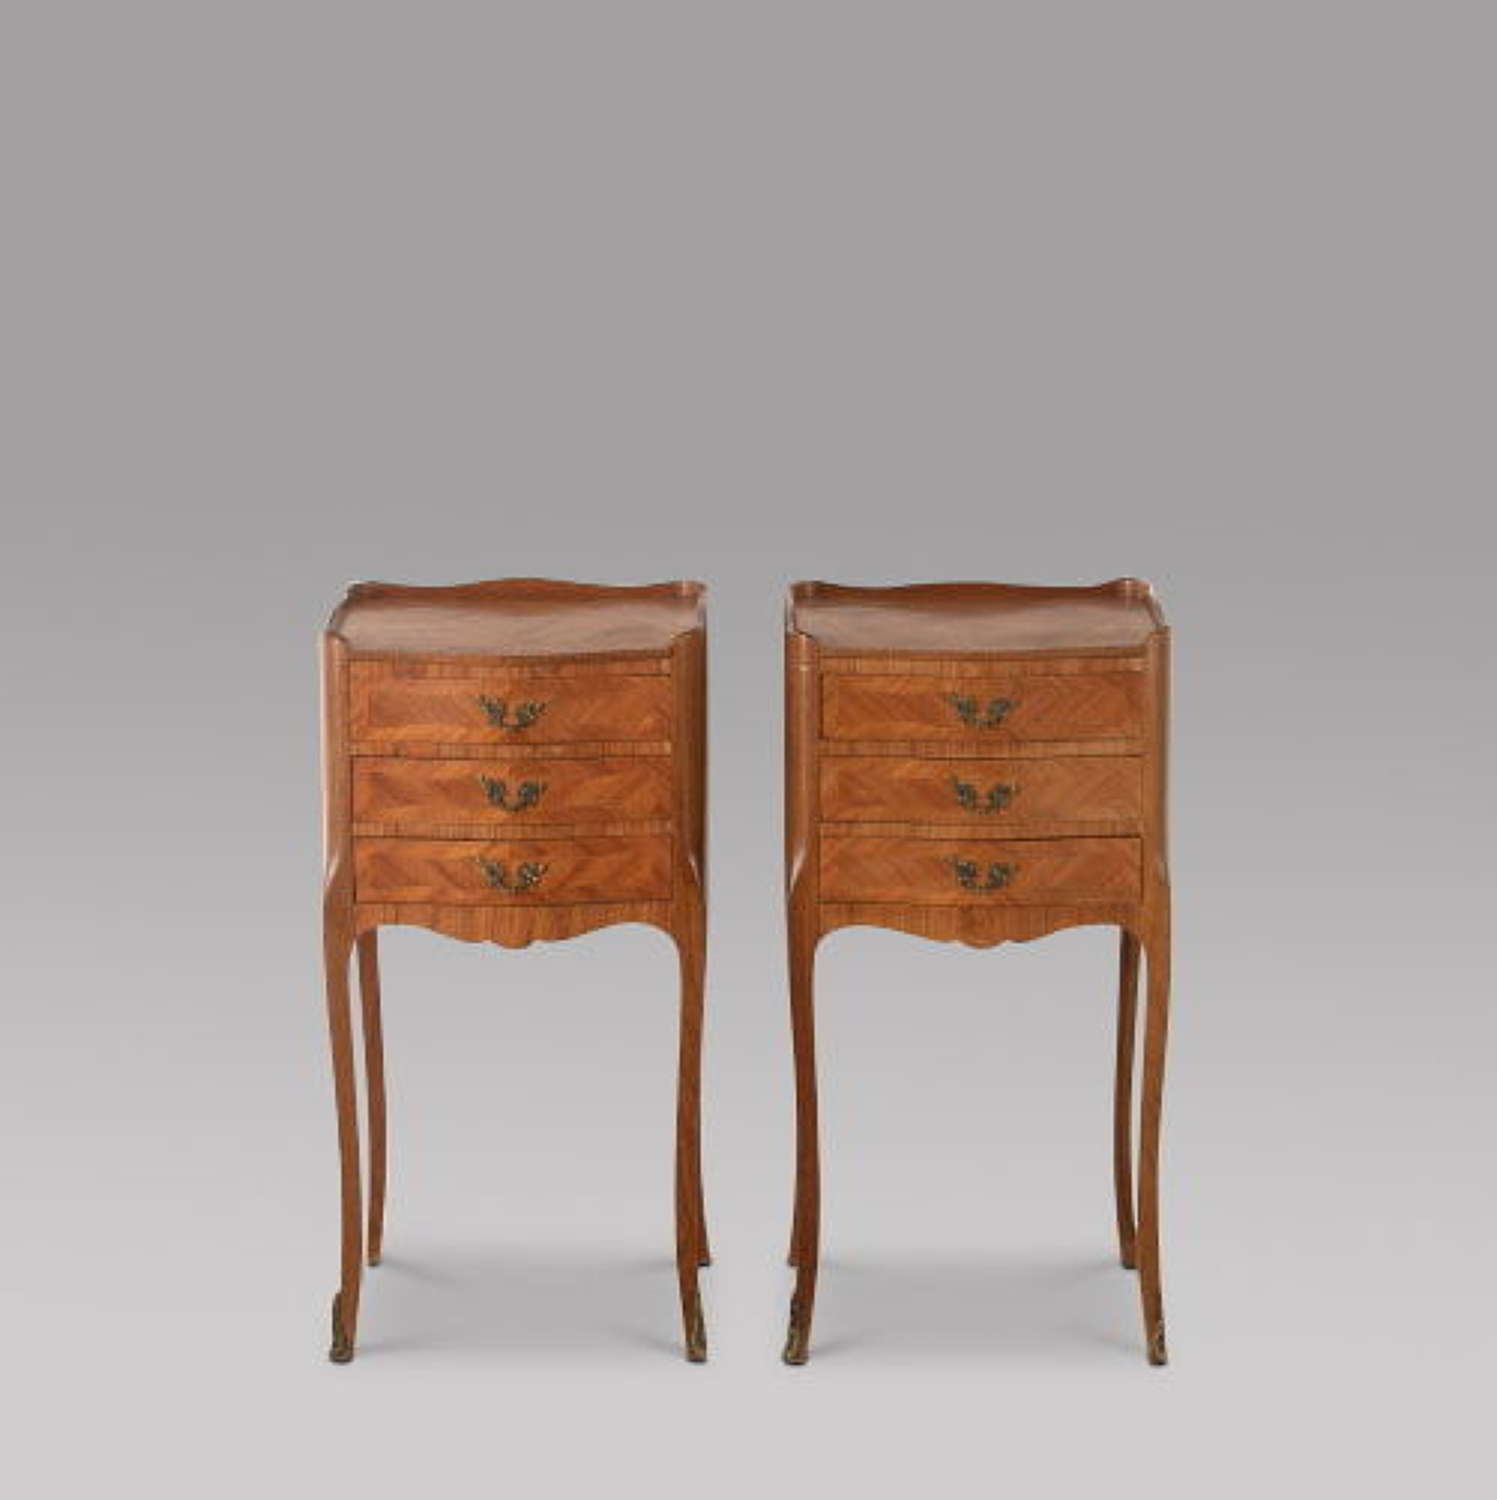 Pair of French Kingwood Bedside Tables